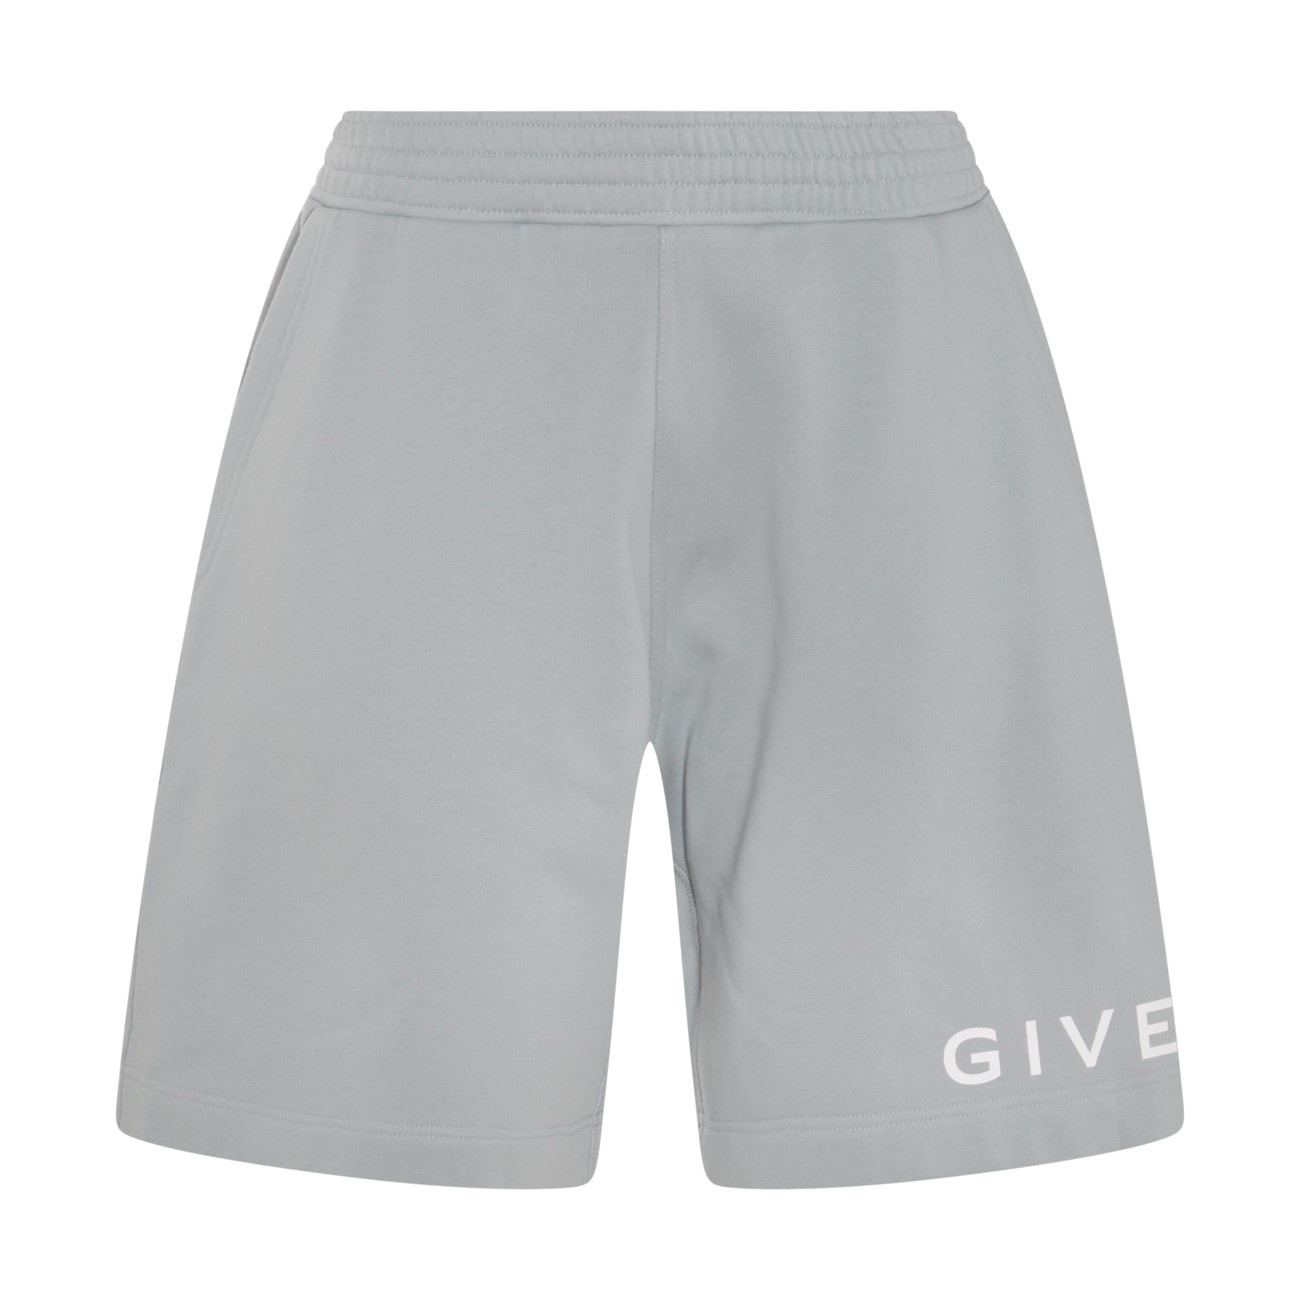 mineral blue cotton track shorts - 1